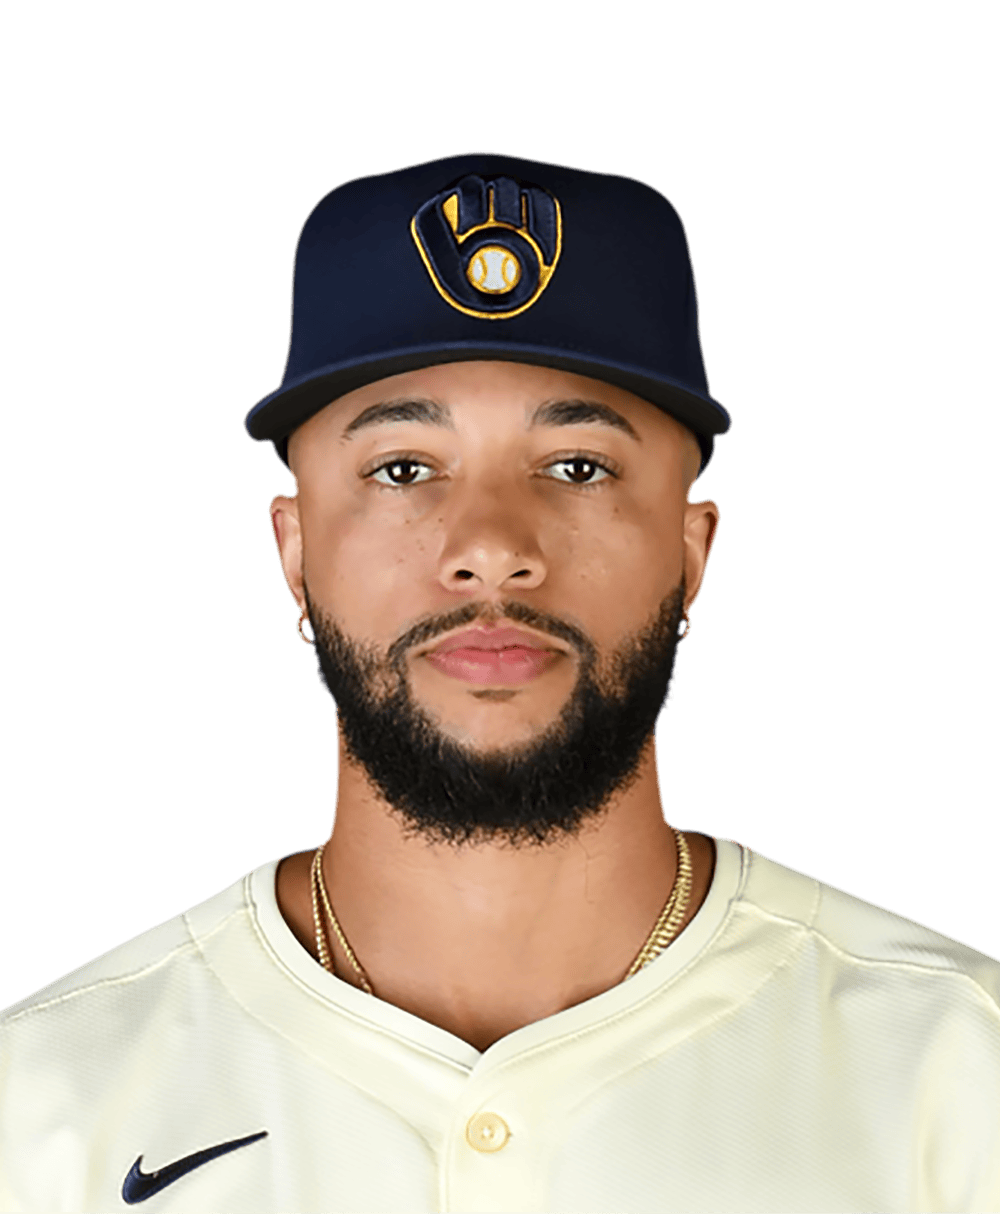 The Top 10 Milwaukee Brewers Players Right Now: No. 8 Devin Williams